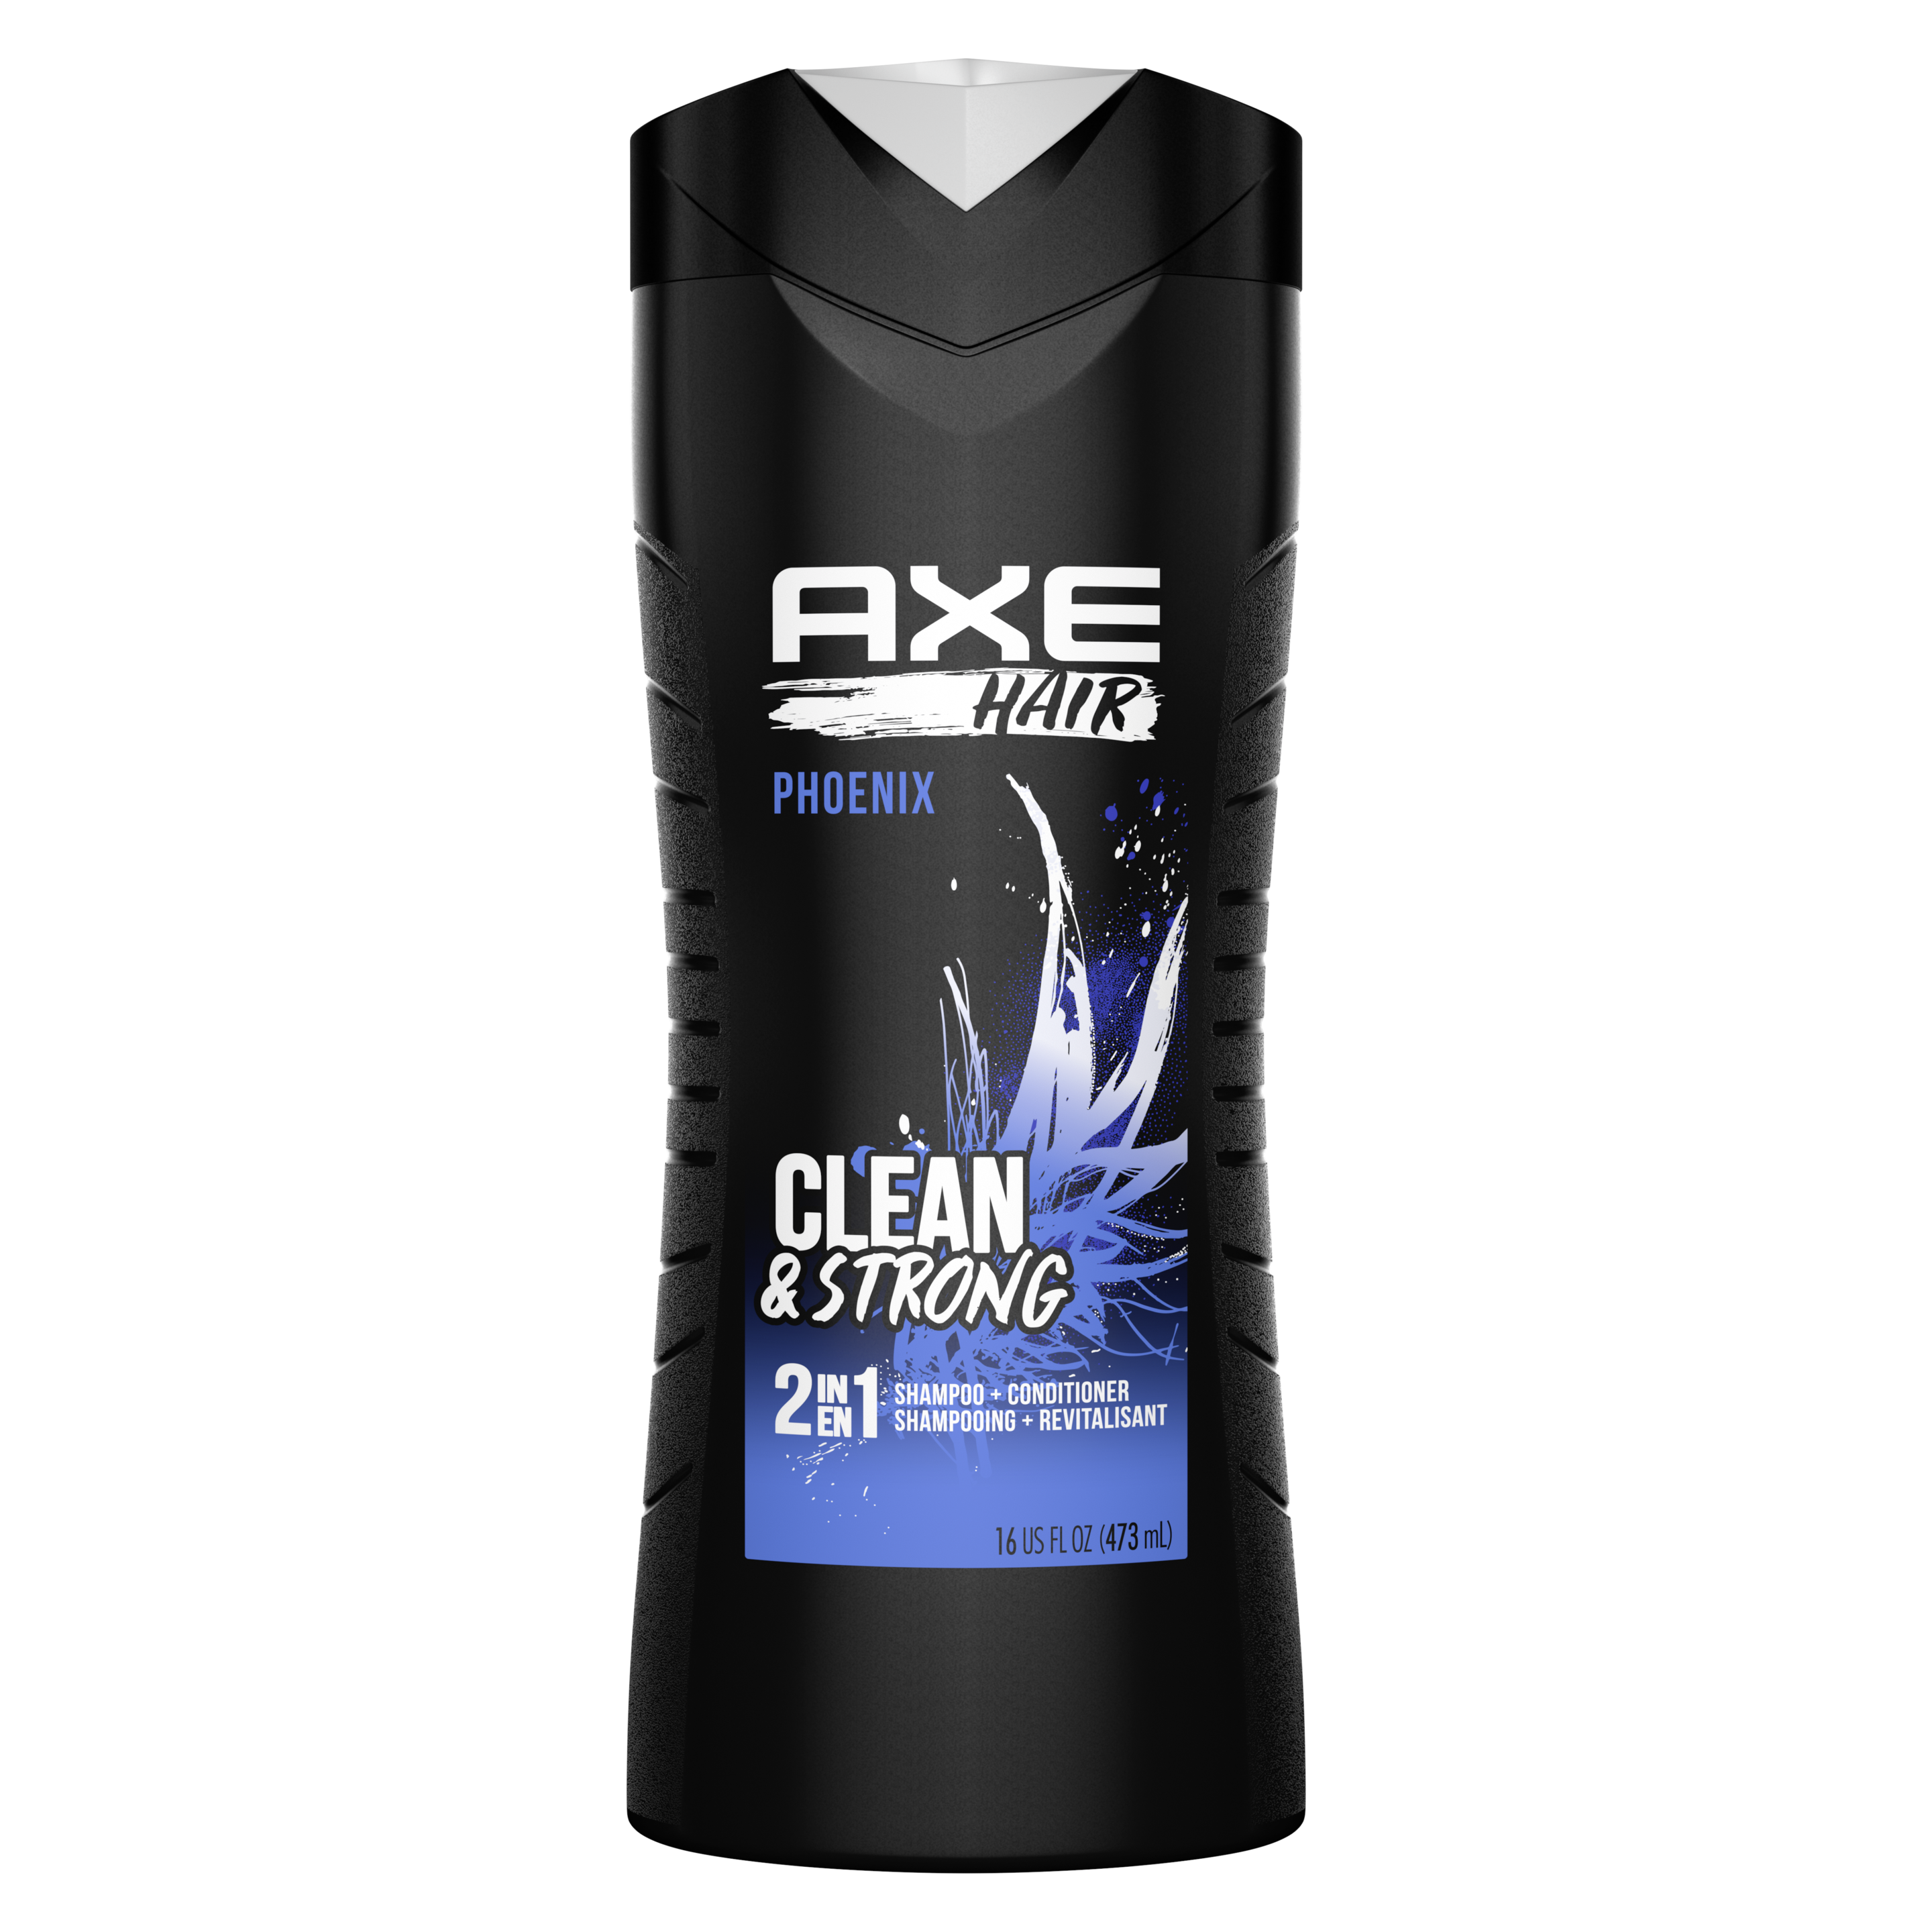 AXE Hair Phoenix 2-in-1 Shampoo and Conditioner